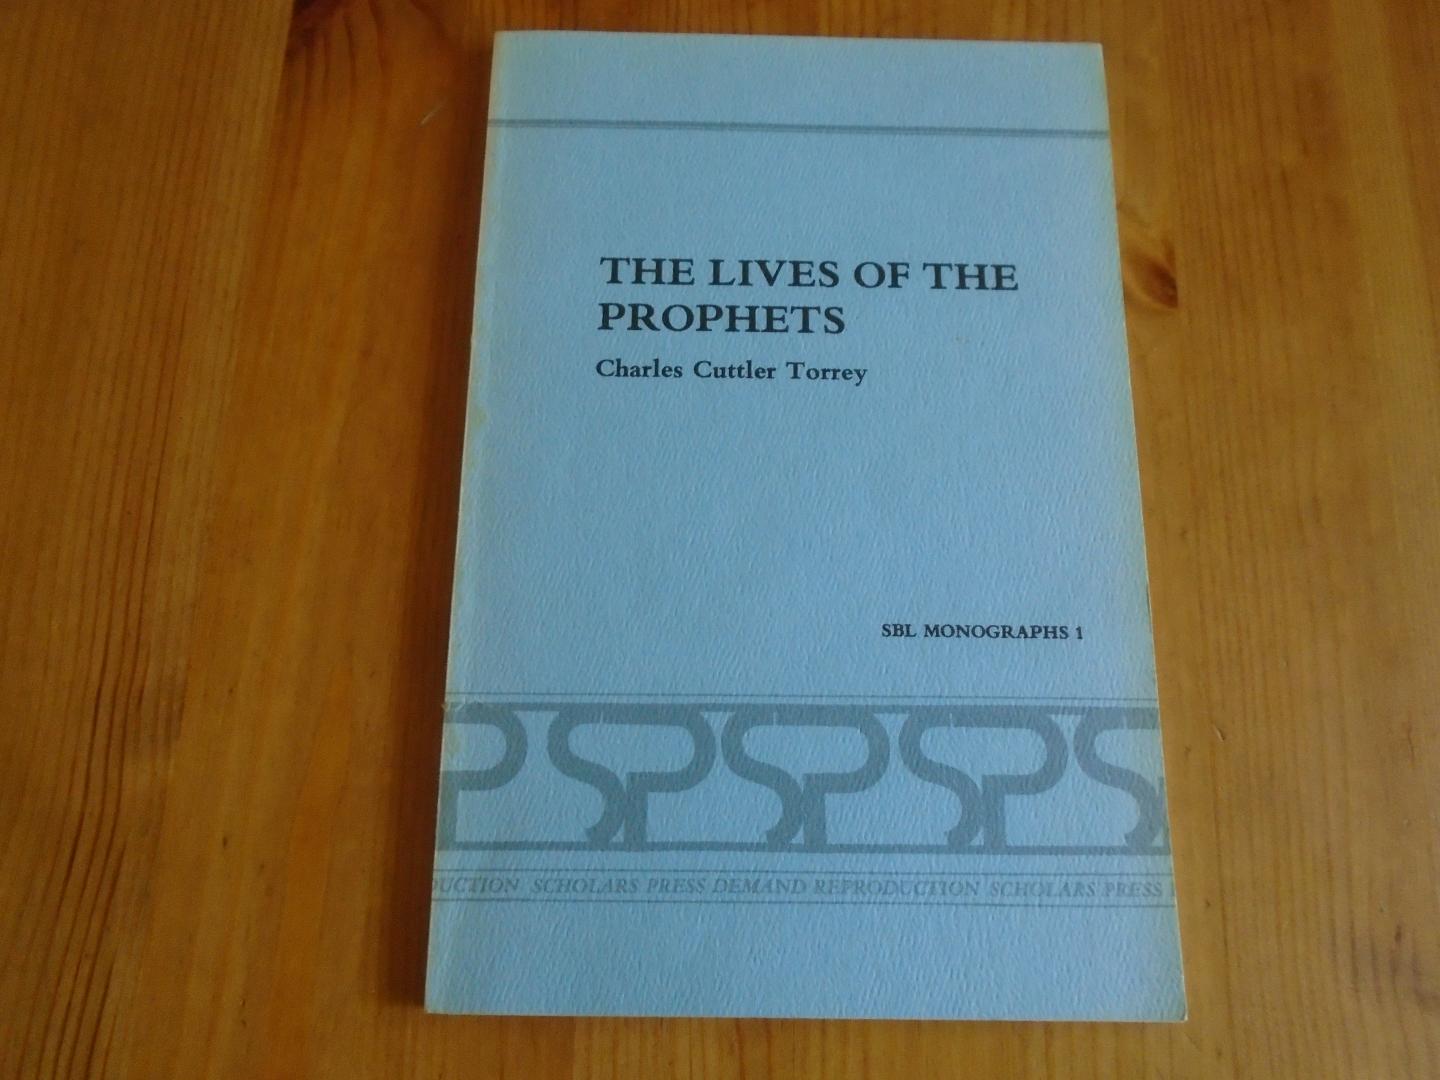 Torrey, Charles Cuttler - The Lives of the Prophets. Greek Text and Translation